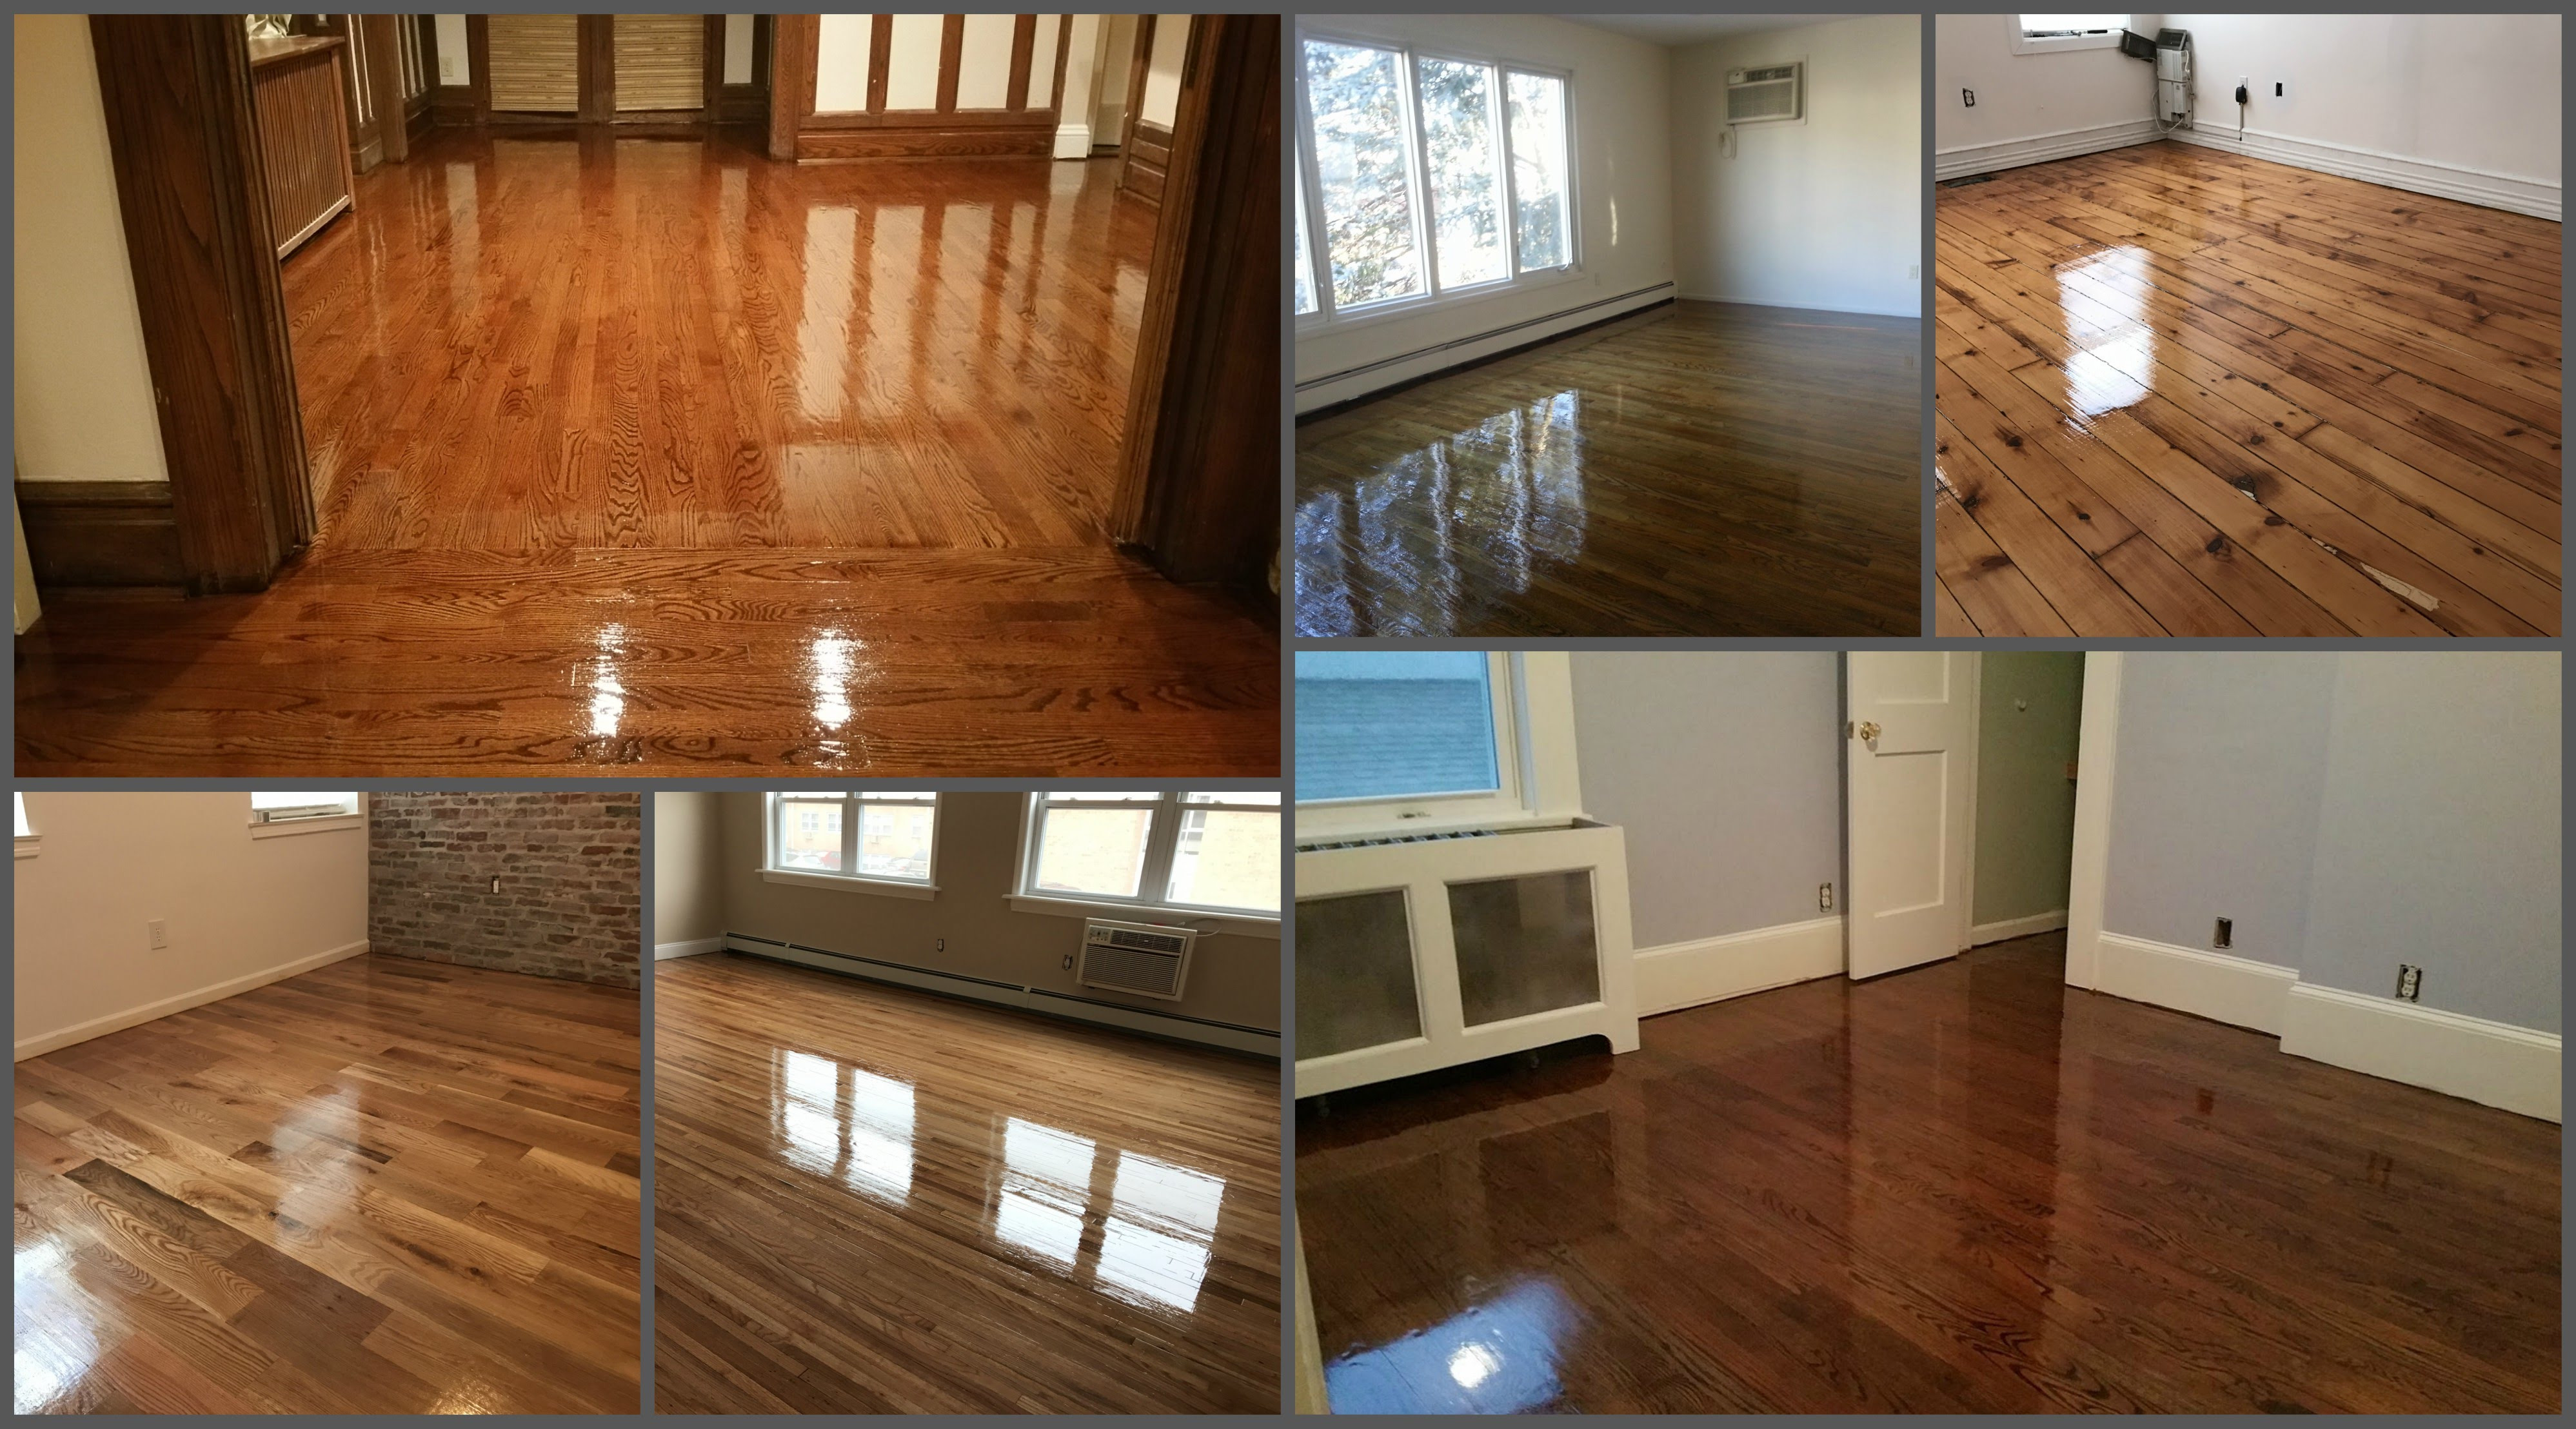 Hardwood Floor Refinishing Bergen County Nj Of Hardwood Floors Service by Cris Throughout Our Flooring Services Installation All Types Of Wood